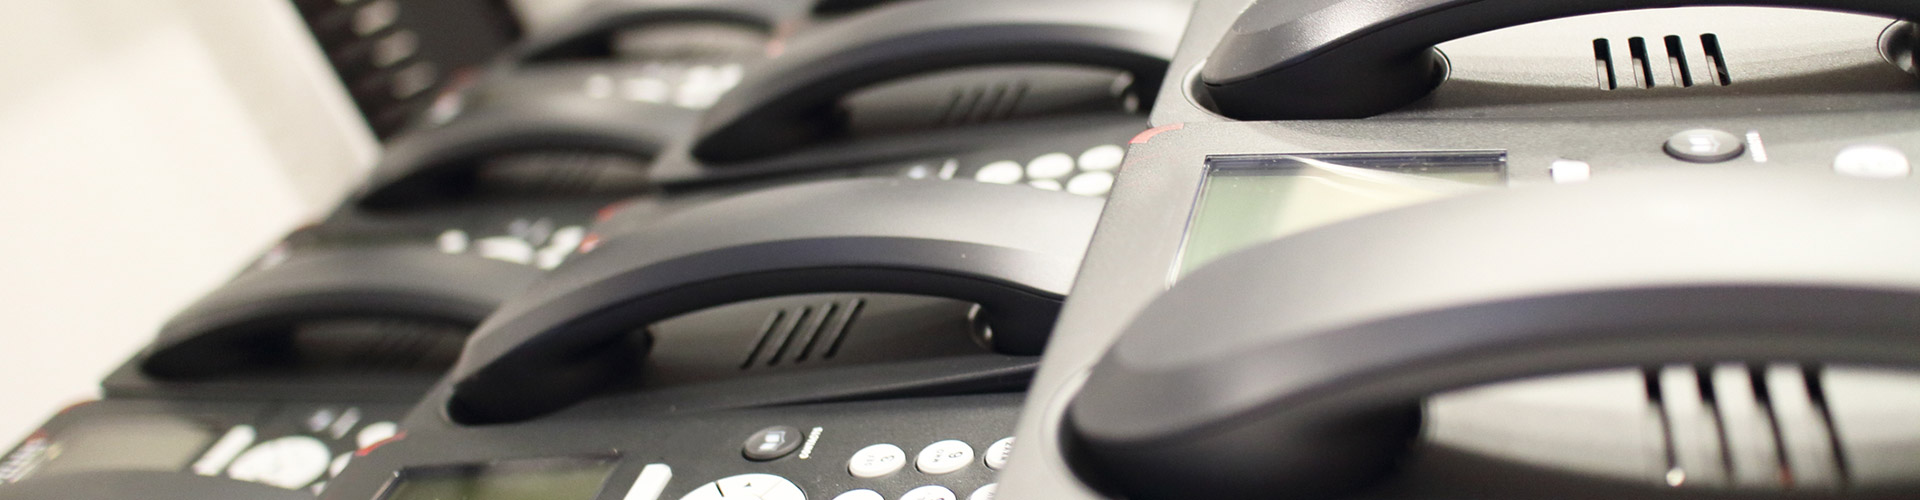 OFFICE PHONE SYSTEMS<br />
